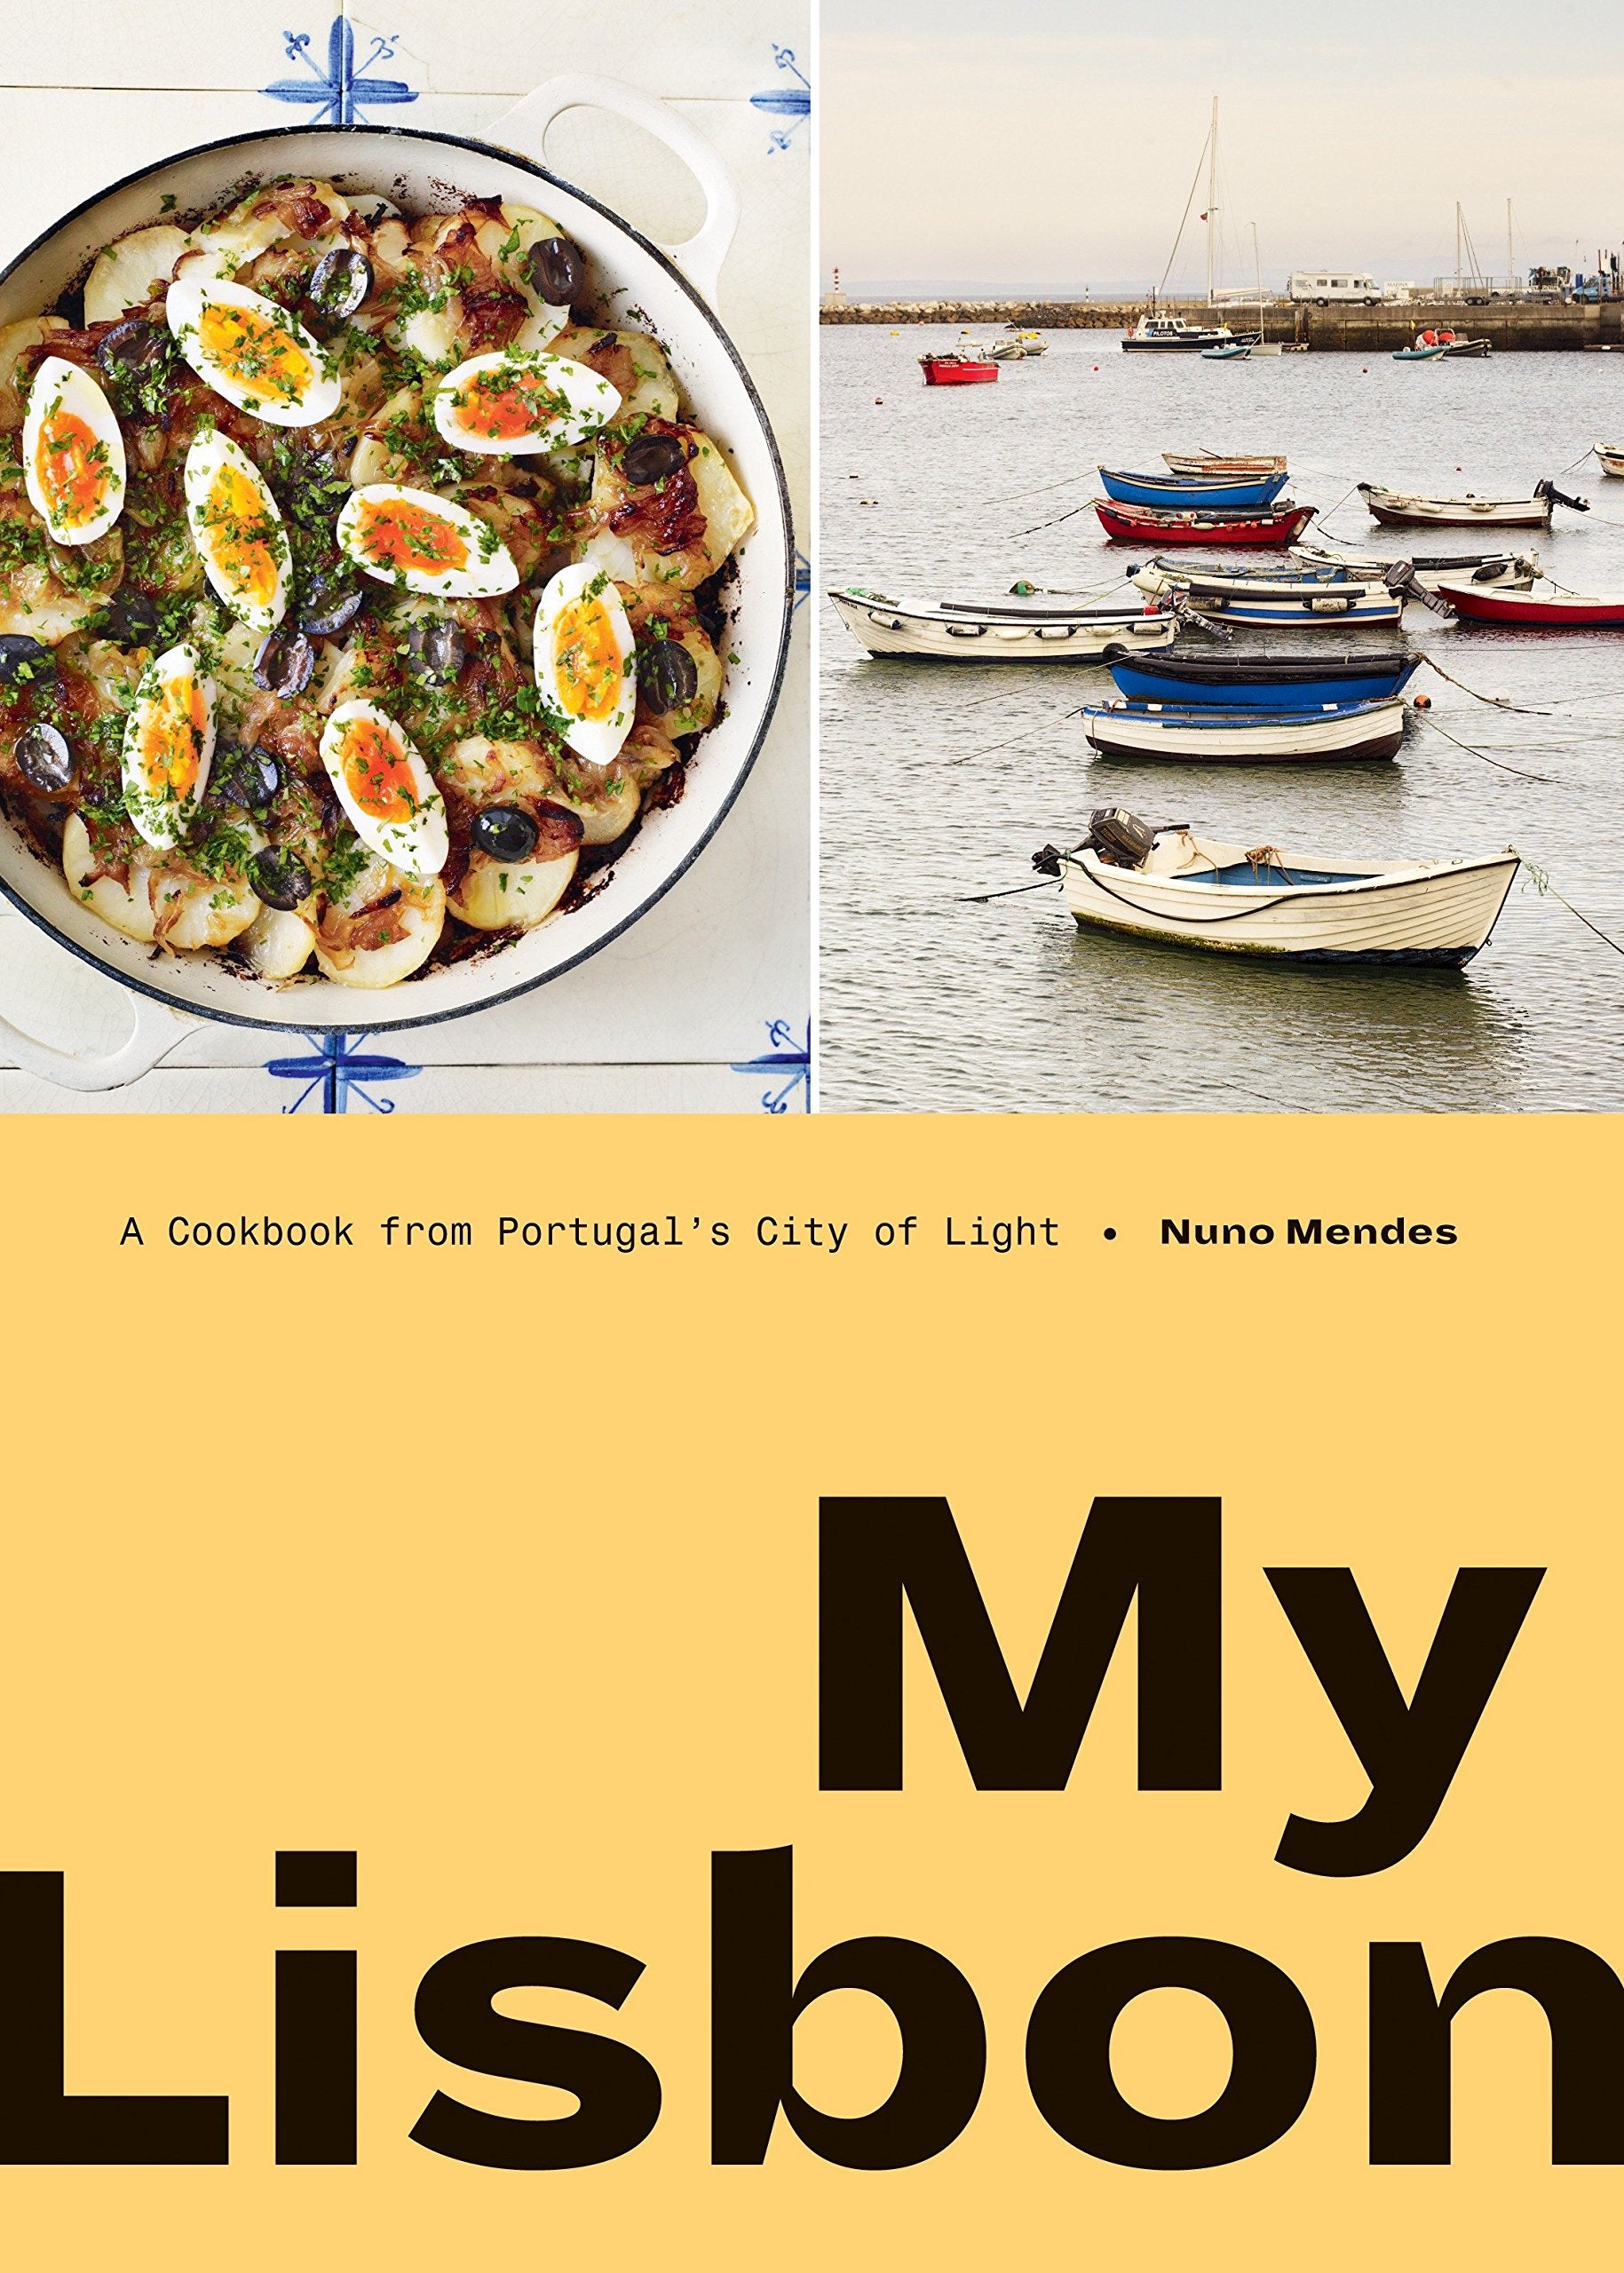 My Lisbon: A Cookbook from Portugal's City of Light (Nuno Mendes)